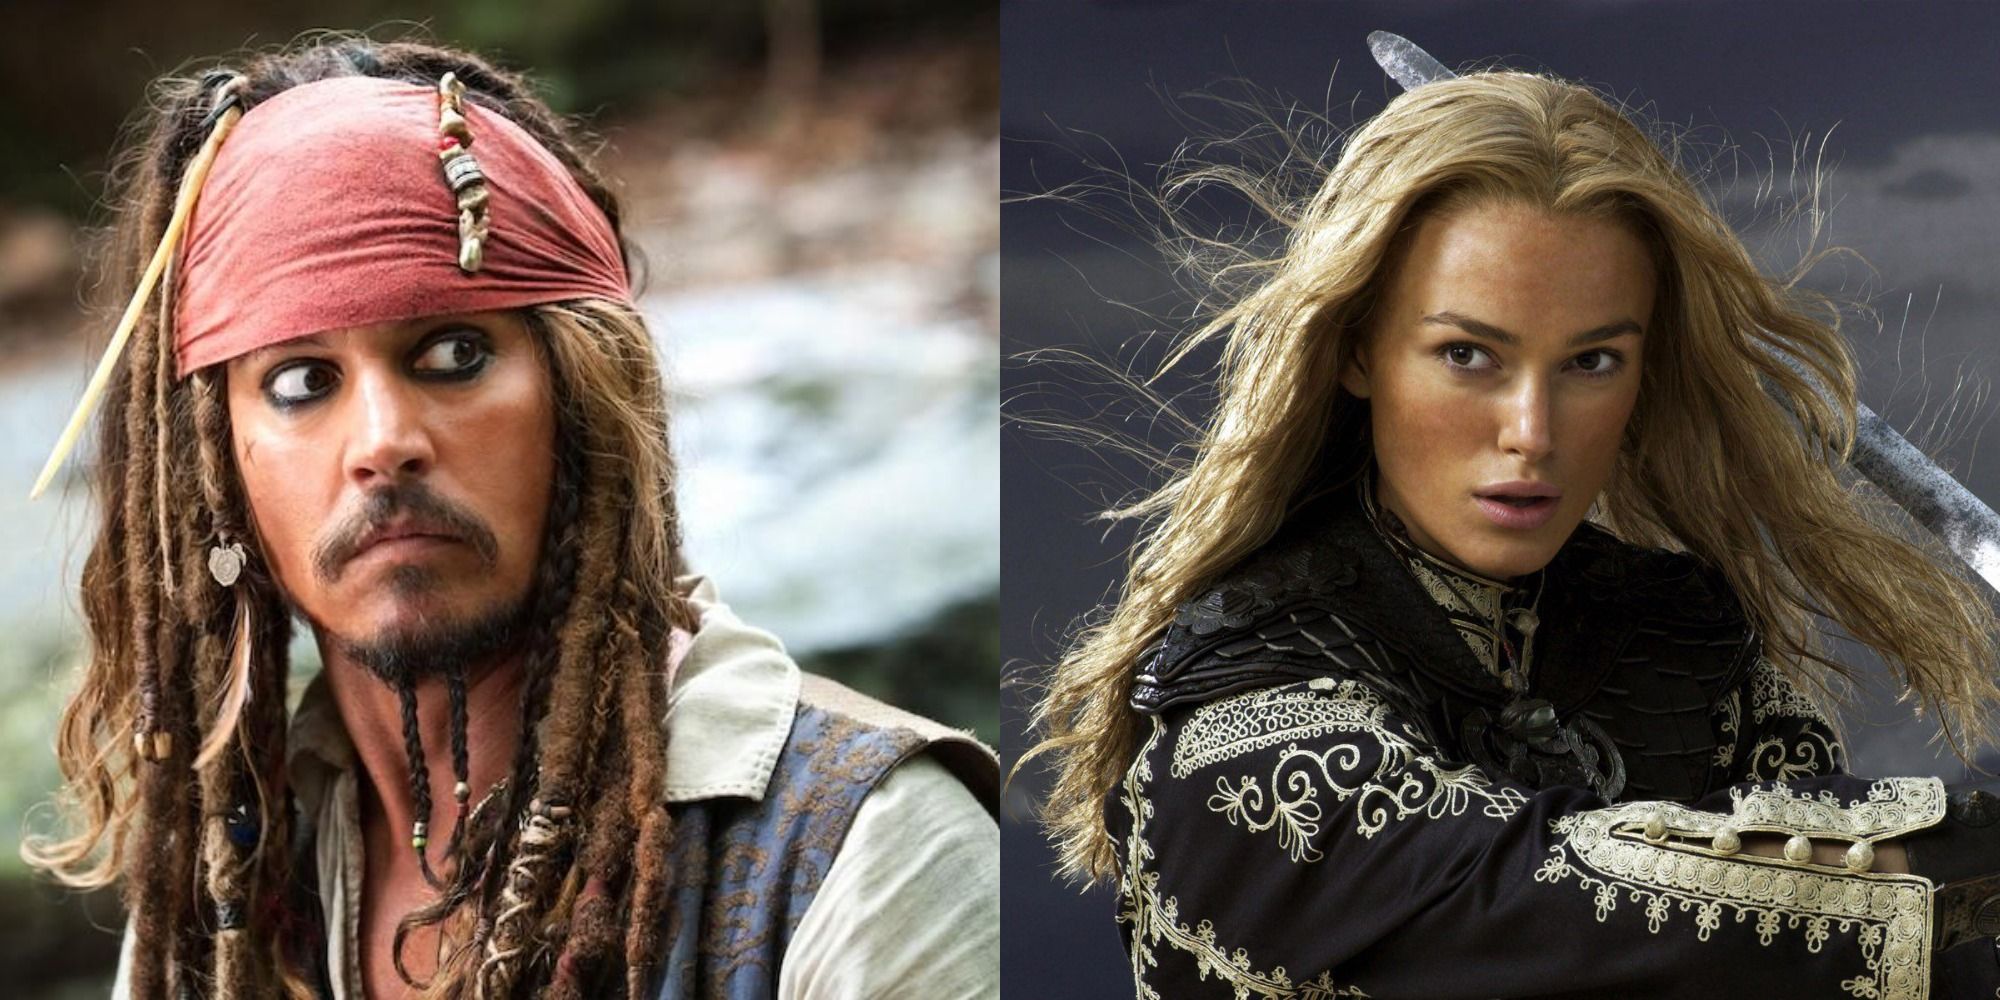 Split iamge showing Jack Sparrow and Elizabeth Swann in Pirates of the Caribbean.